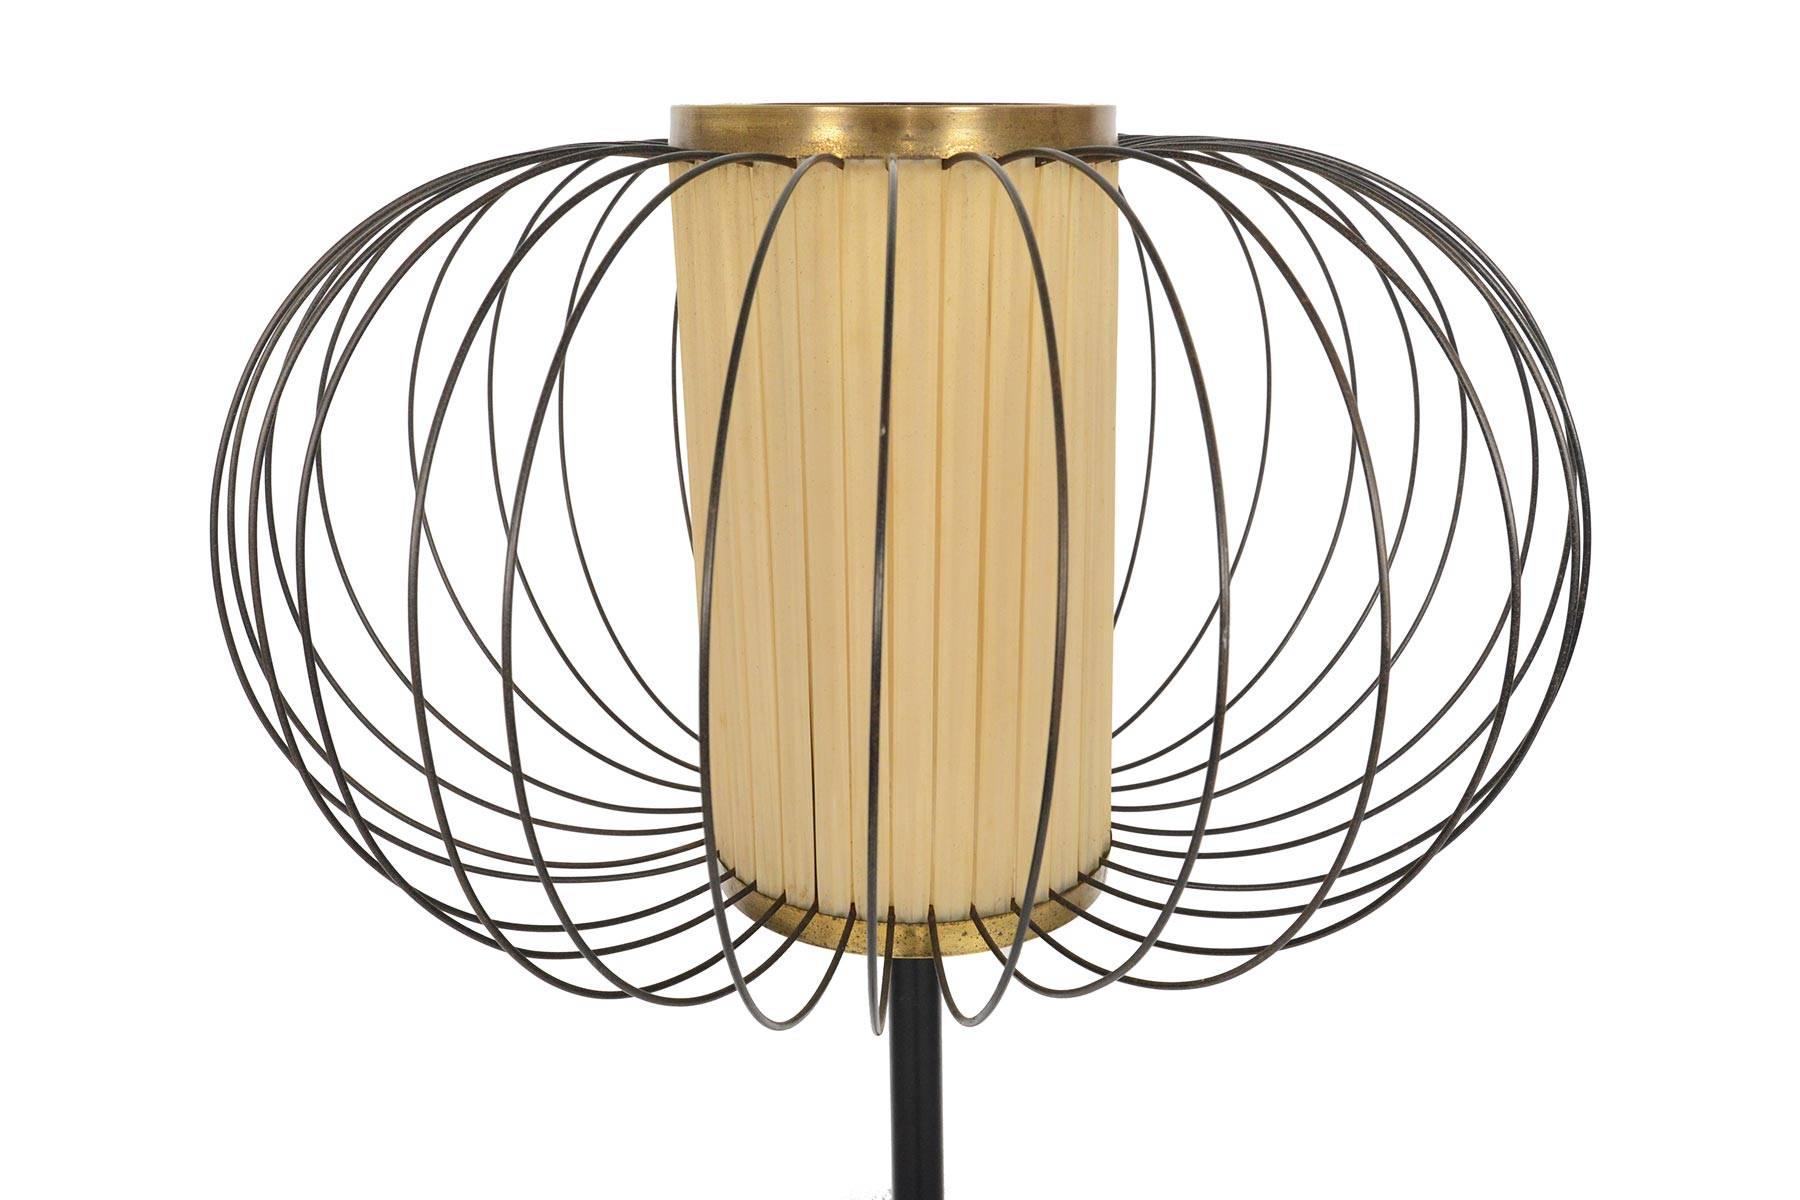 This striking Italian modern floor lamp not only offers a beautiful warm glow, but is designed with a magnificent sculptural appeal. A wire cage surrounds a parchment- toned ribbon shade. The ebonized steel shaft stands on a weighted marble base. In